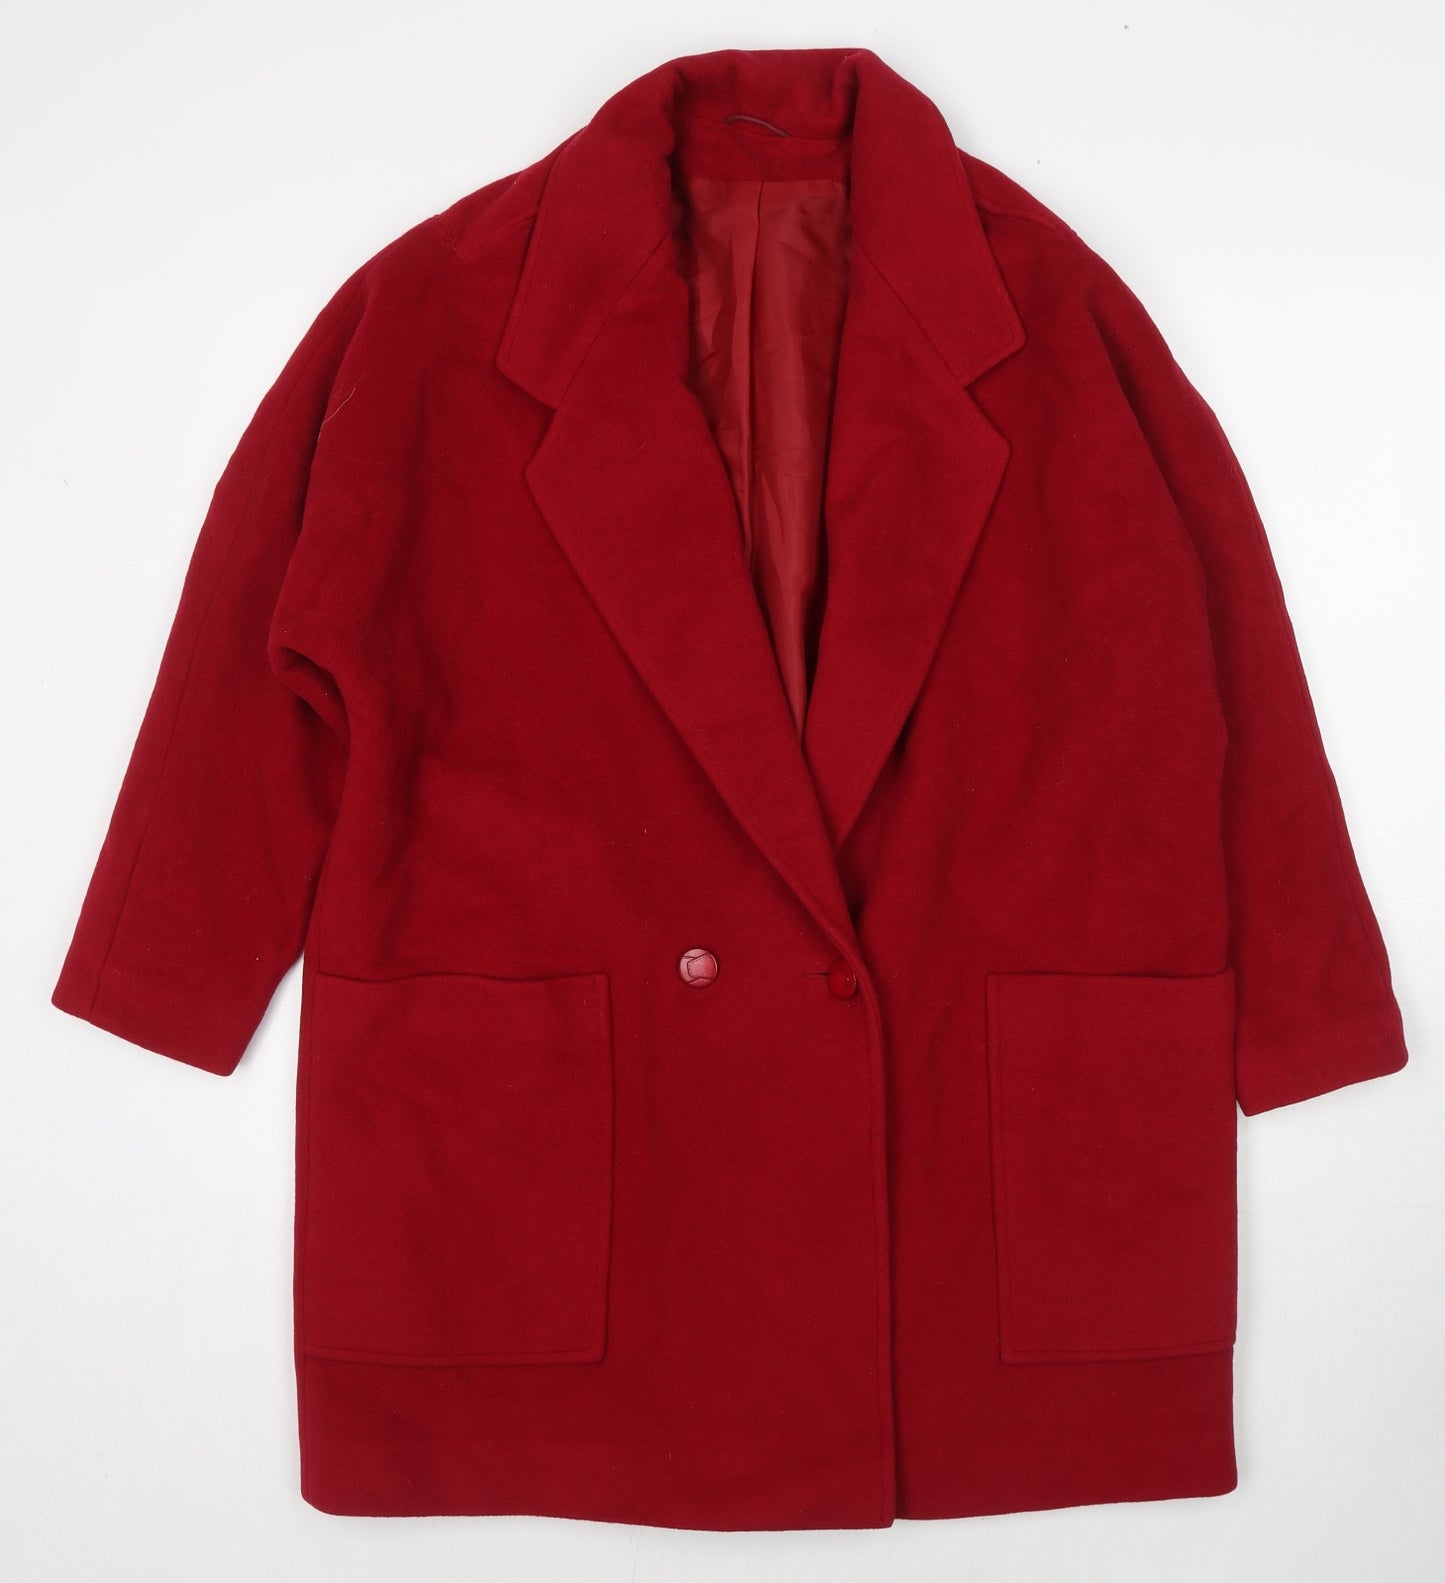 Made in U.K. Womens Red Overcoat Coat Size 16 Button